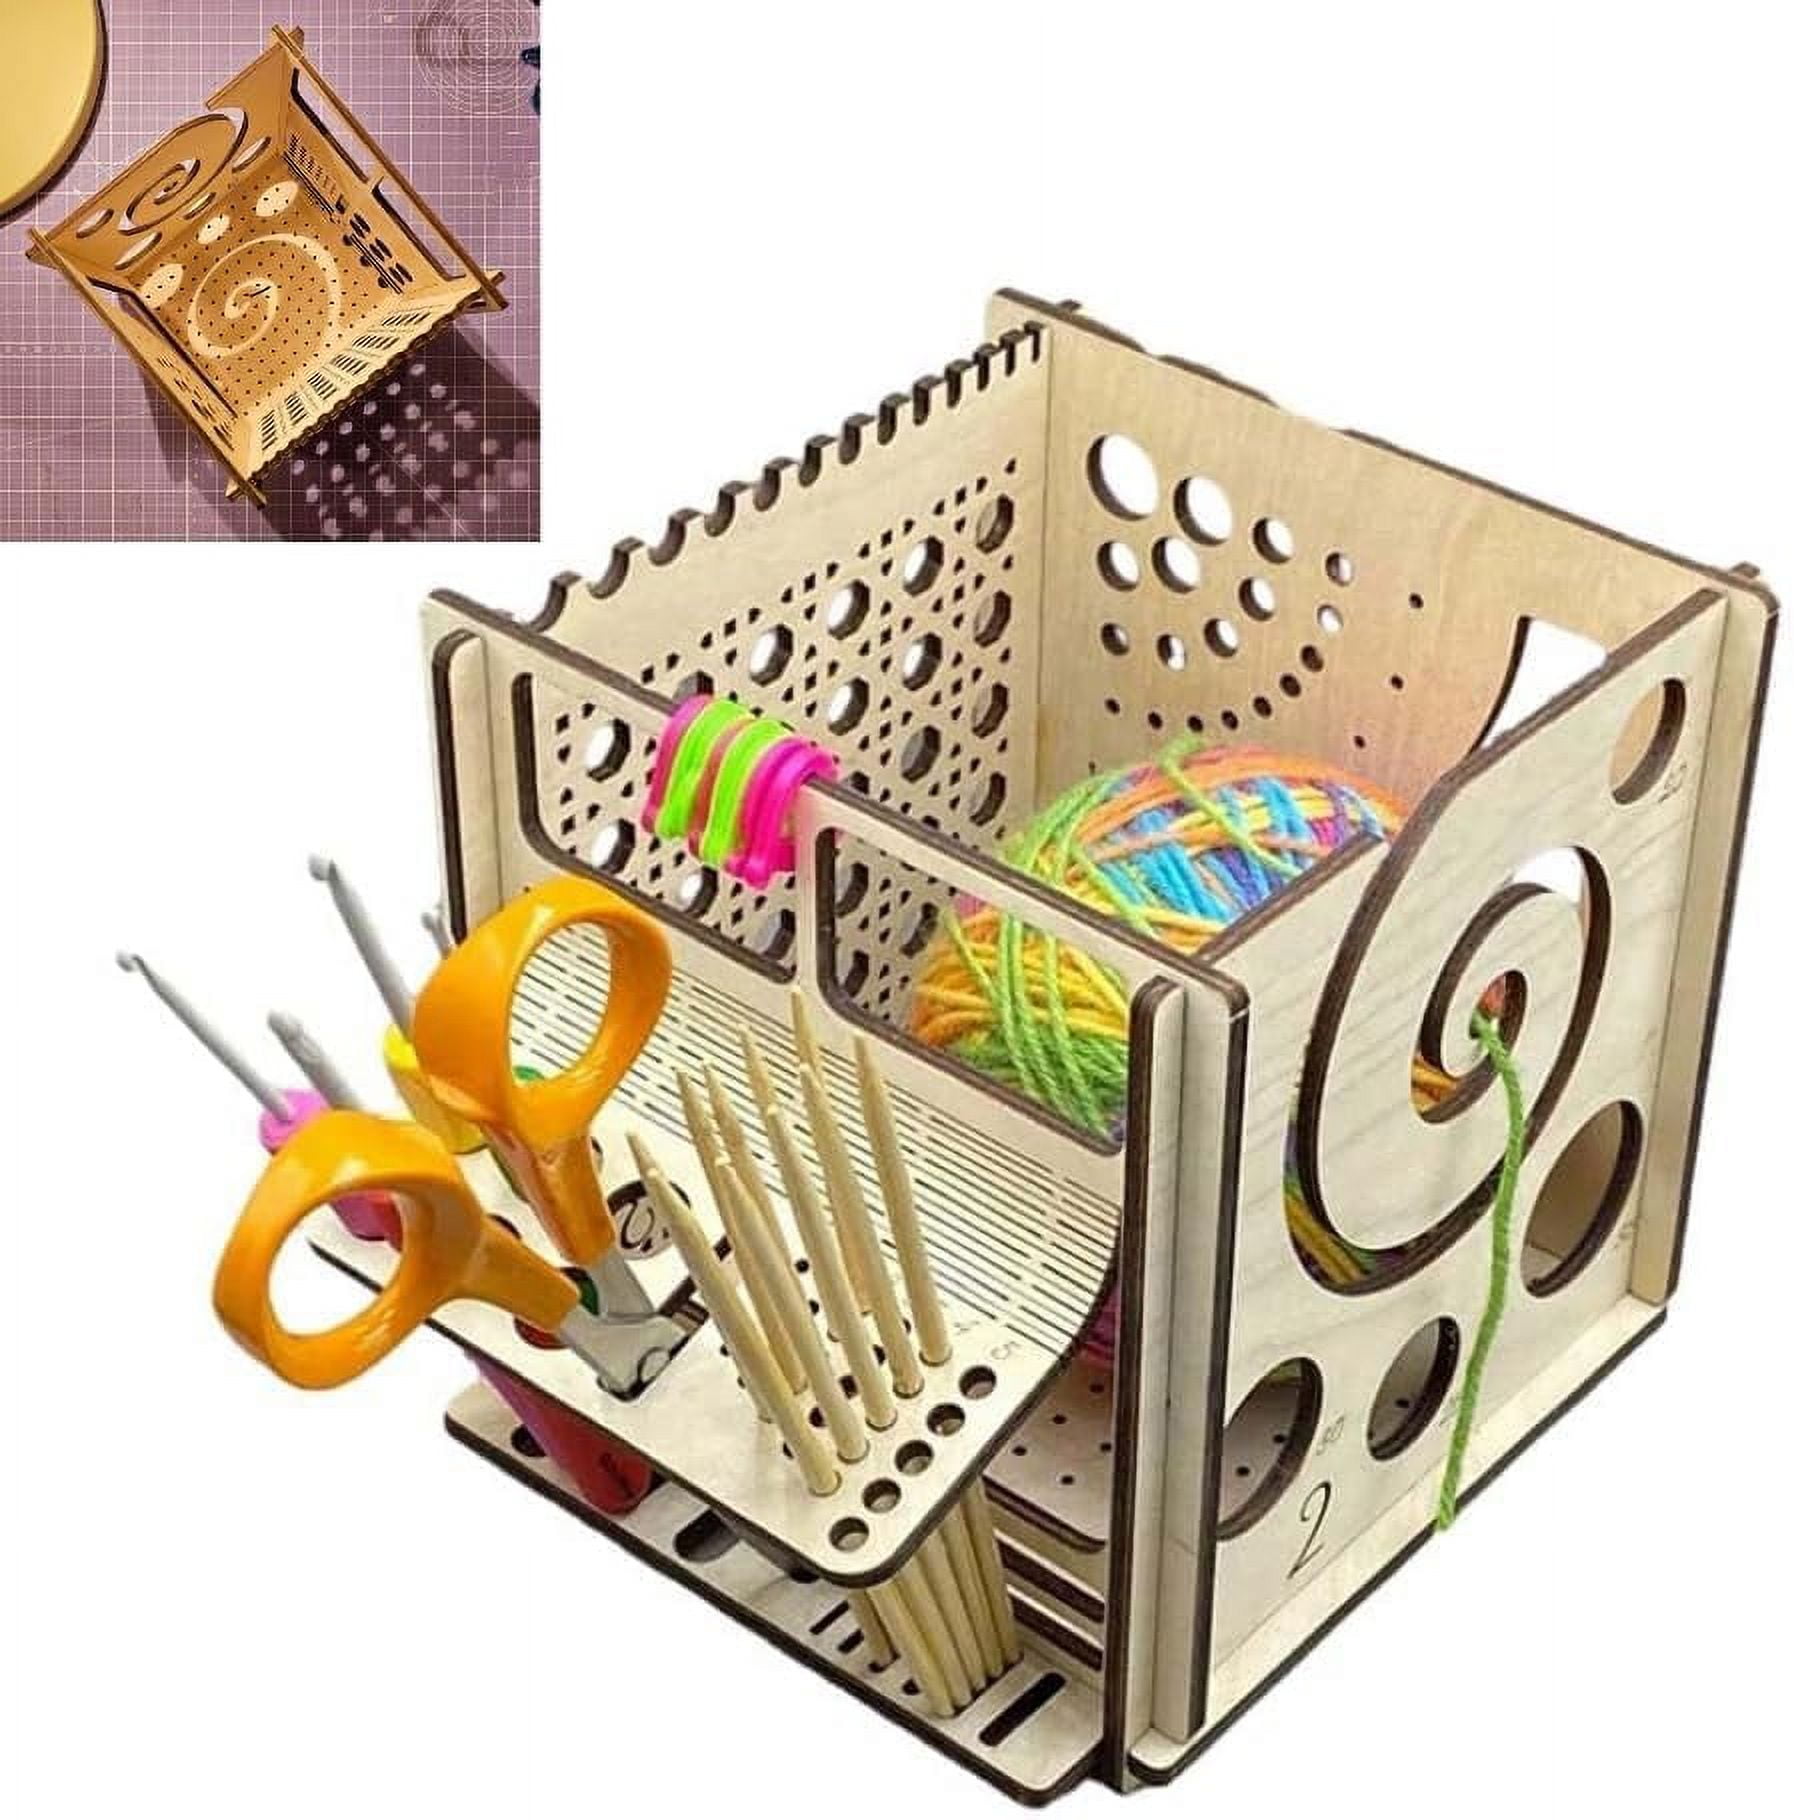  KOKNIT Collapsible Yarn Storage Bin, Yarn Basket Organizer Cube  with Dual Handles for Shelves, Home and Office, Best Gift for Knitter and  Crocheter